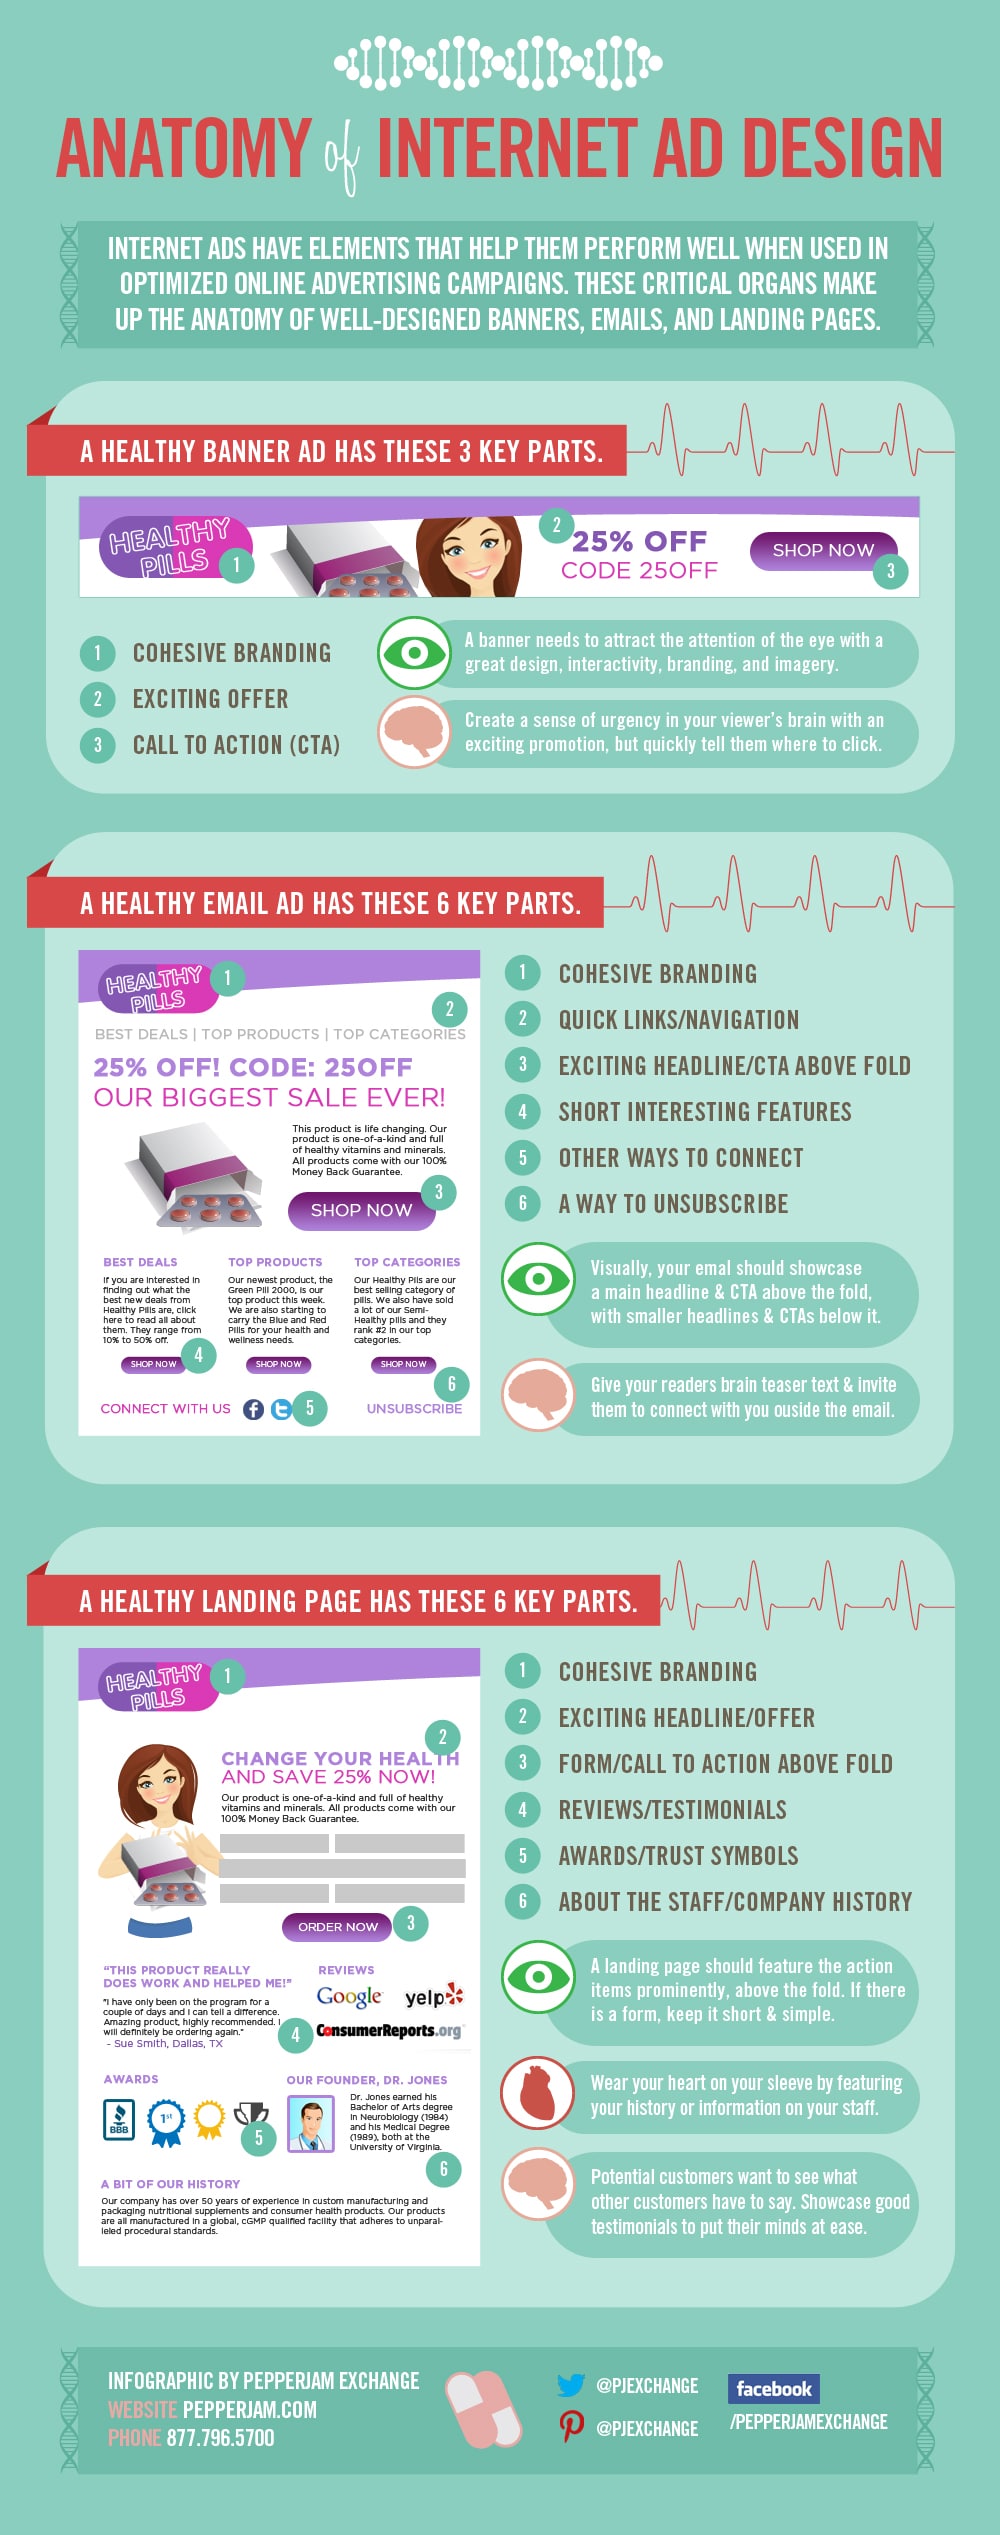 The Anatomy Of A Working Ad Design [Infographic]